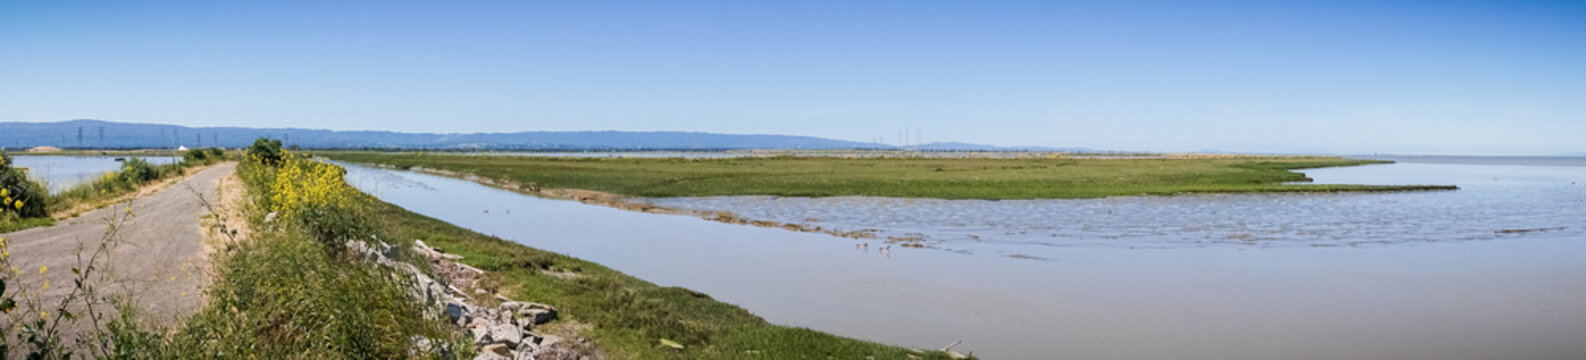 Panoramic view of levee going through the marsh and ponds in south San Francisco bay, California